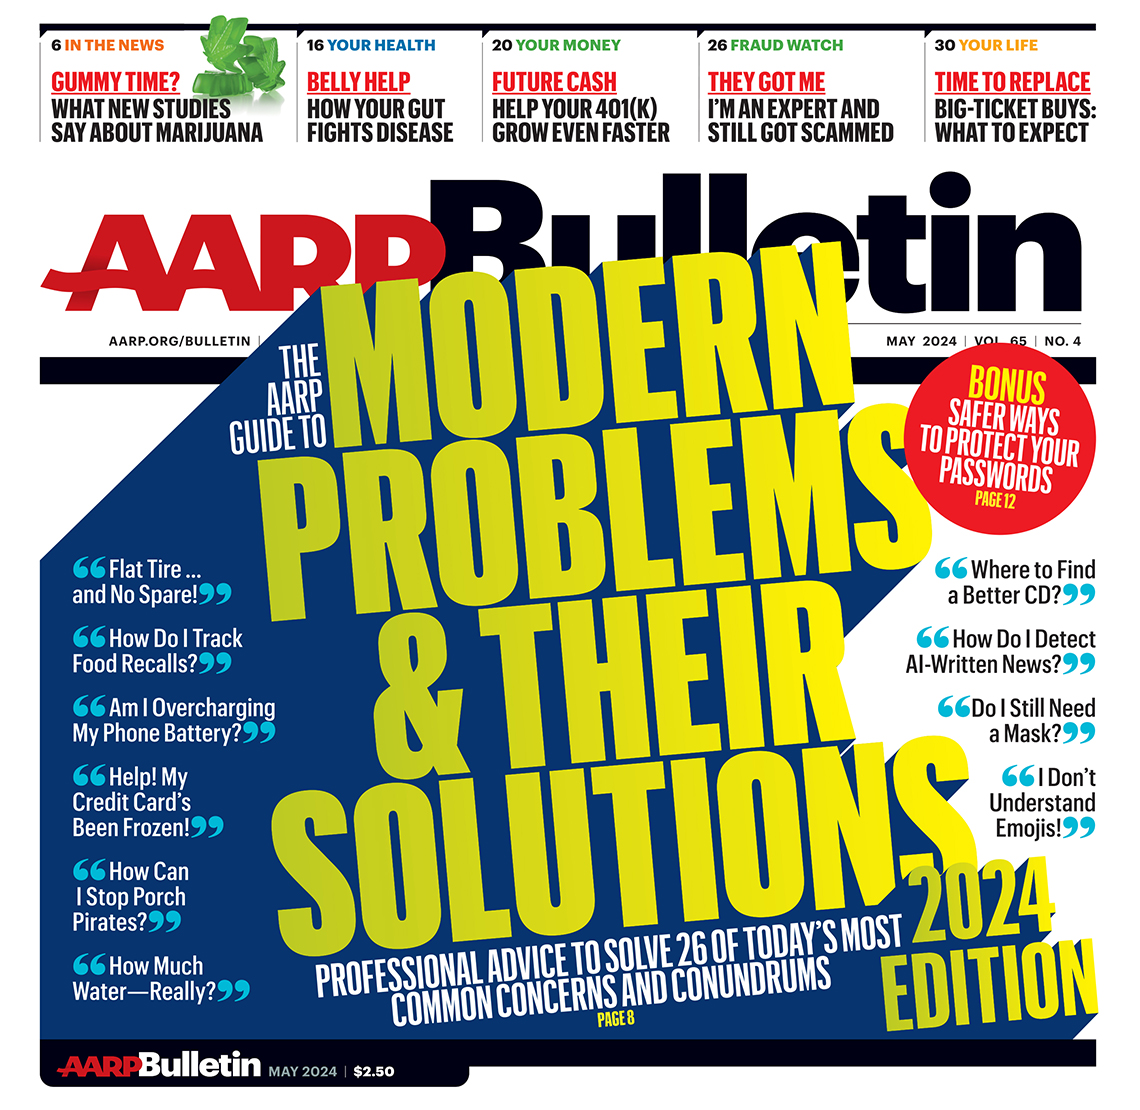 AARP Bulletin May 2024 Modern Problems and Their Solutions